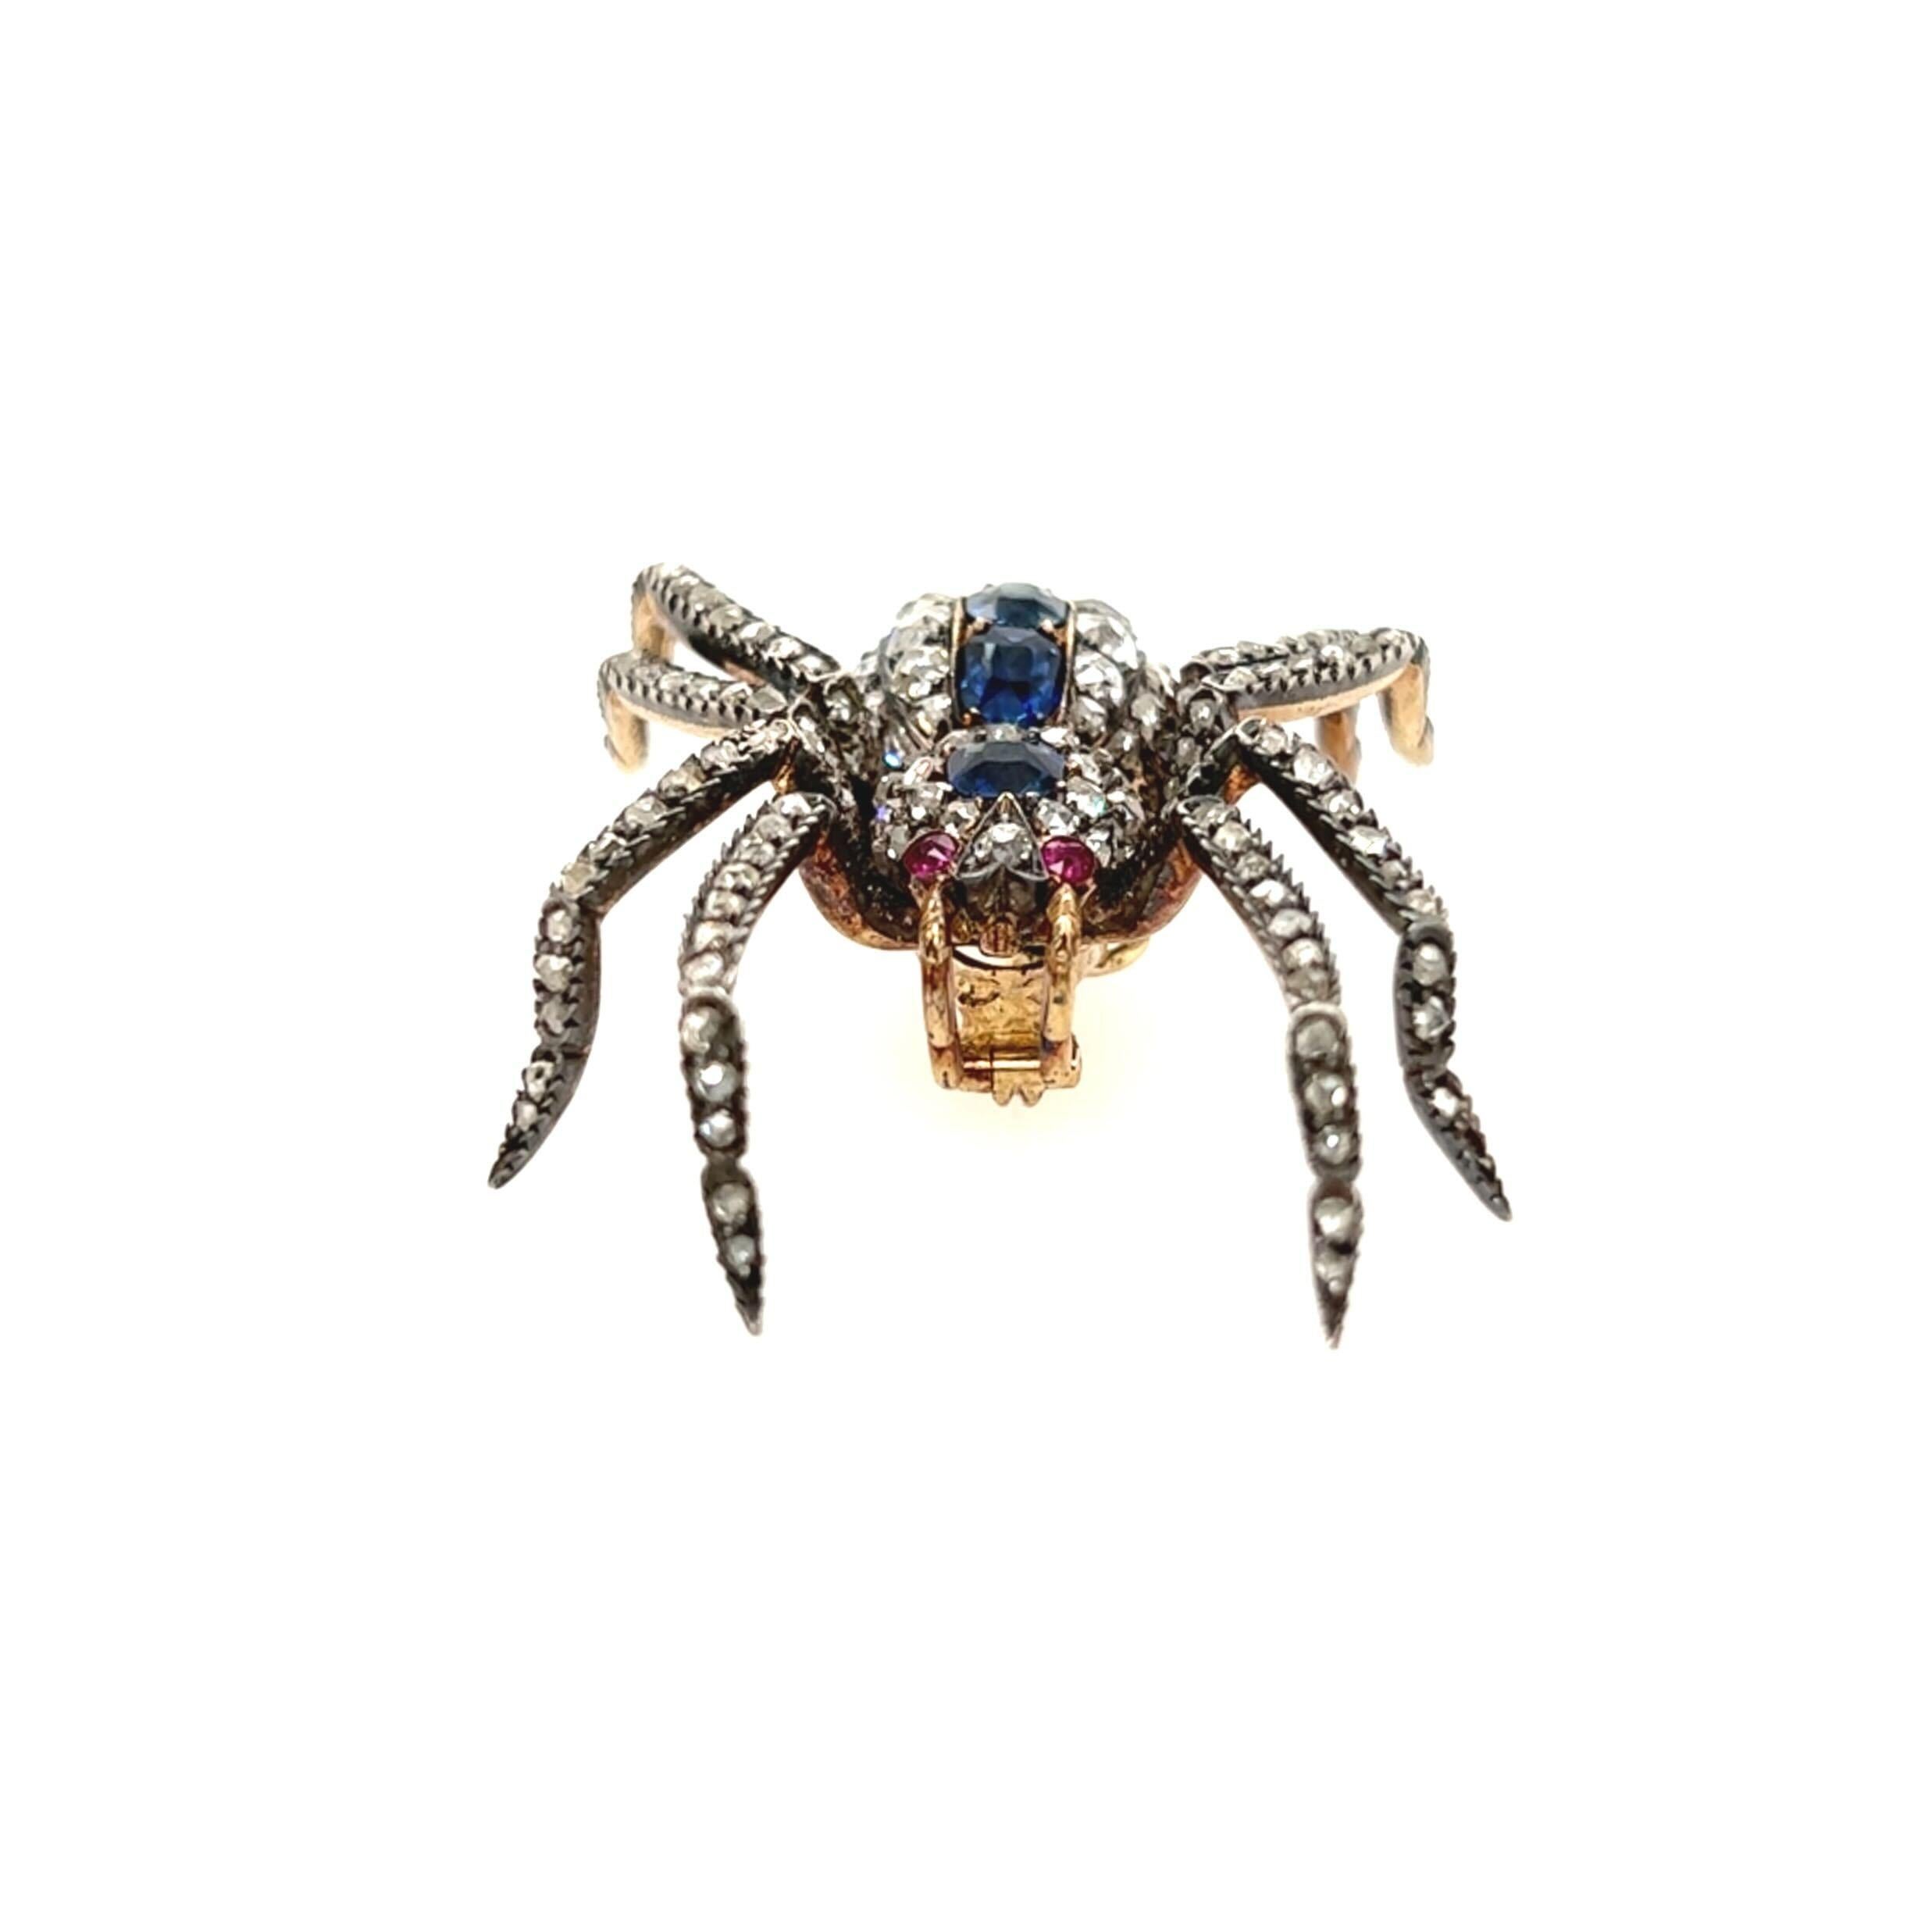 An 18 karat yellow gold, silver topped gold, diamond, sapphire and ruby brooch, 19th Century.  Fashioned as a spider set on the legs and body with approximately one hundred sixty three  rose cut and old mine cut diamonds of various sizes, the body